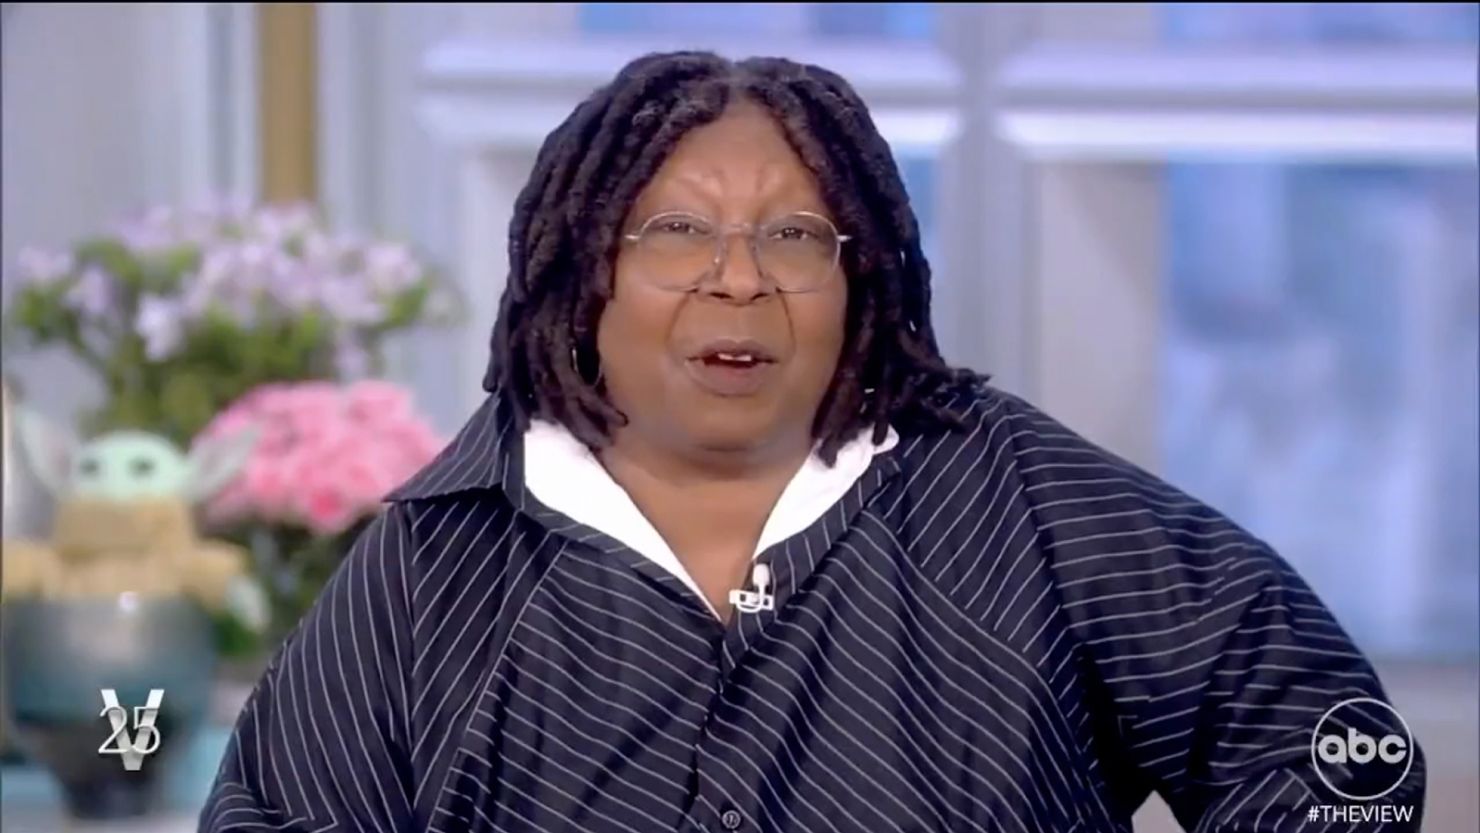 Whoopi Goldberg's baffling claim forced many to ask tough questions about  race and identity in the US | CNN